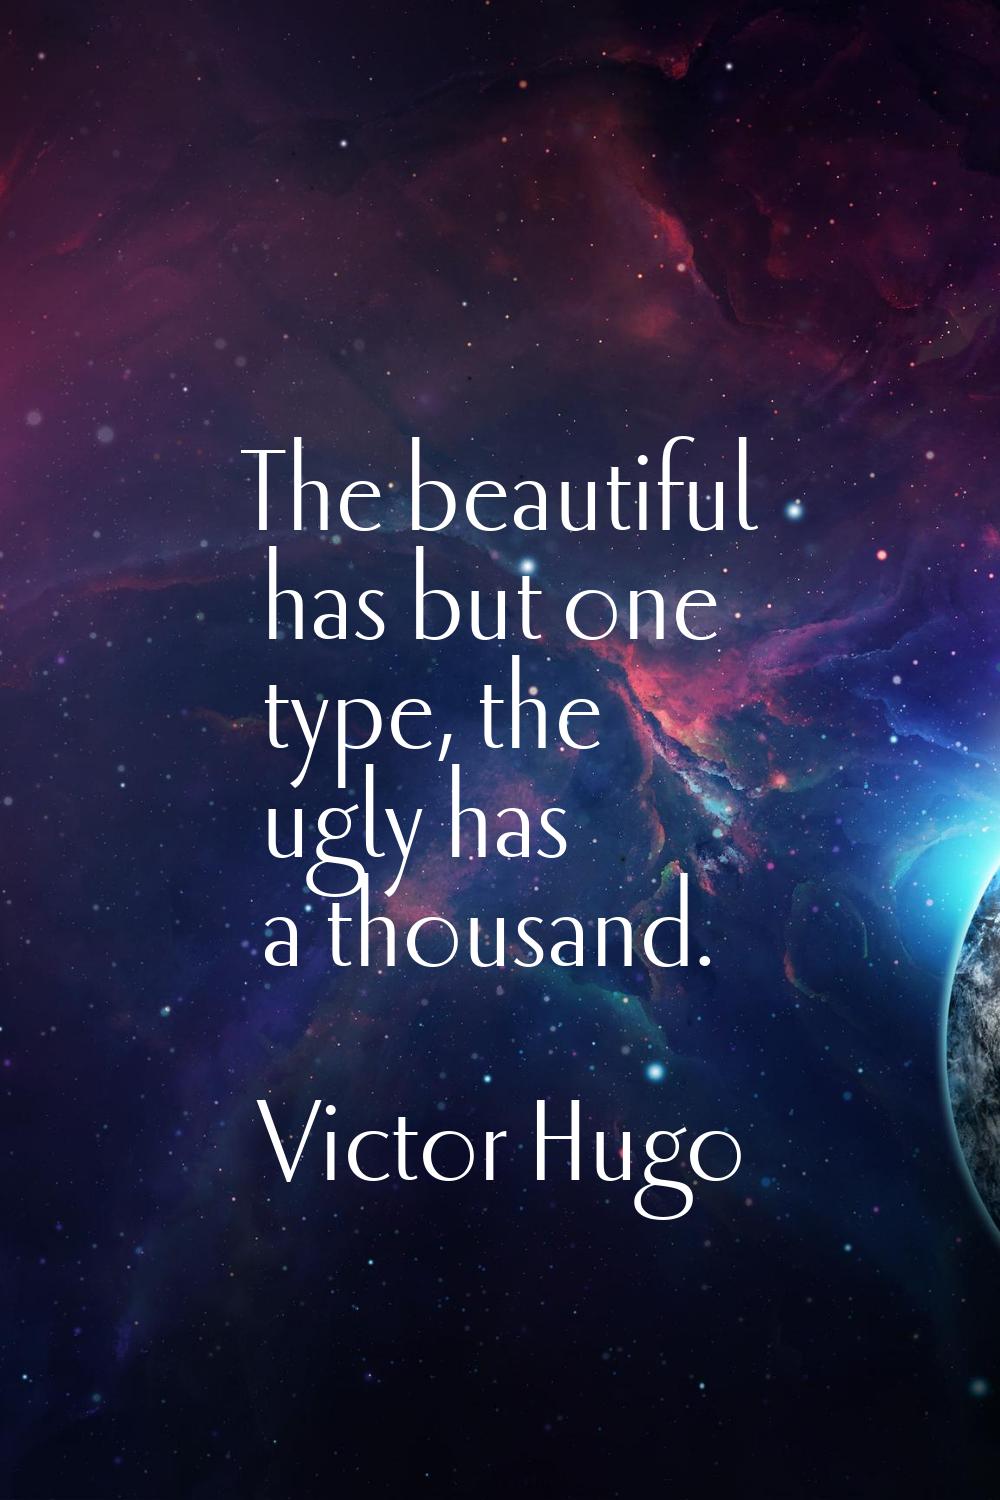 The beautiful has but one type, the ugly has a thousand.